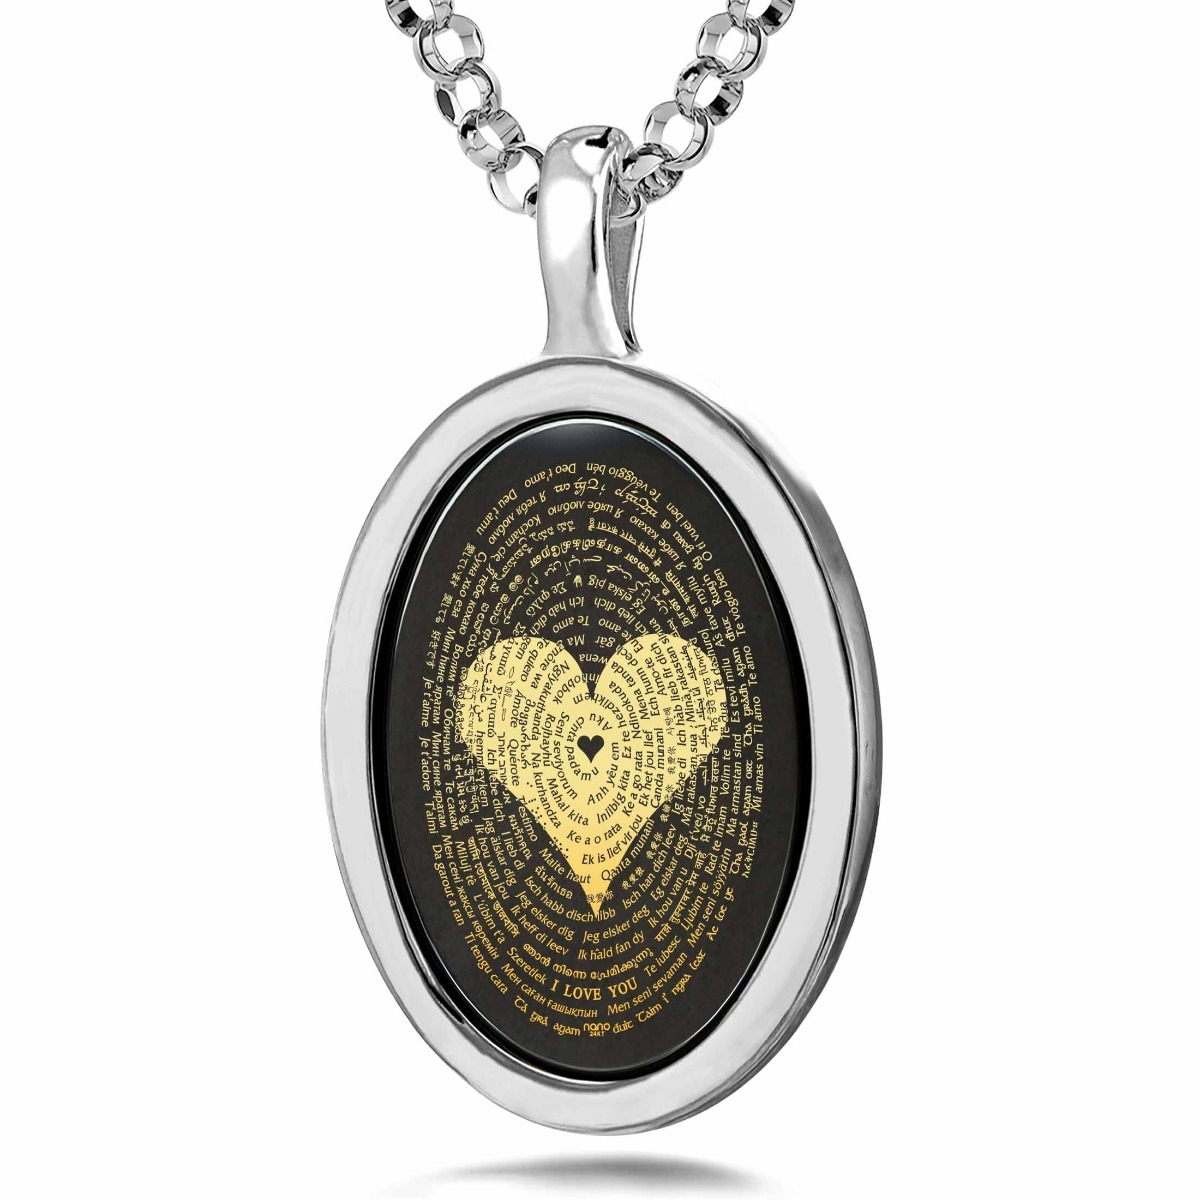 Sterling Silver and Onyx Necklace Micro-Inscribed with 24K Gold Heart and "I Love You" in 120 Languages - 1